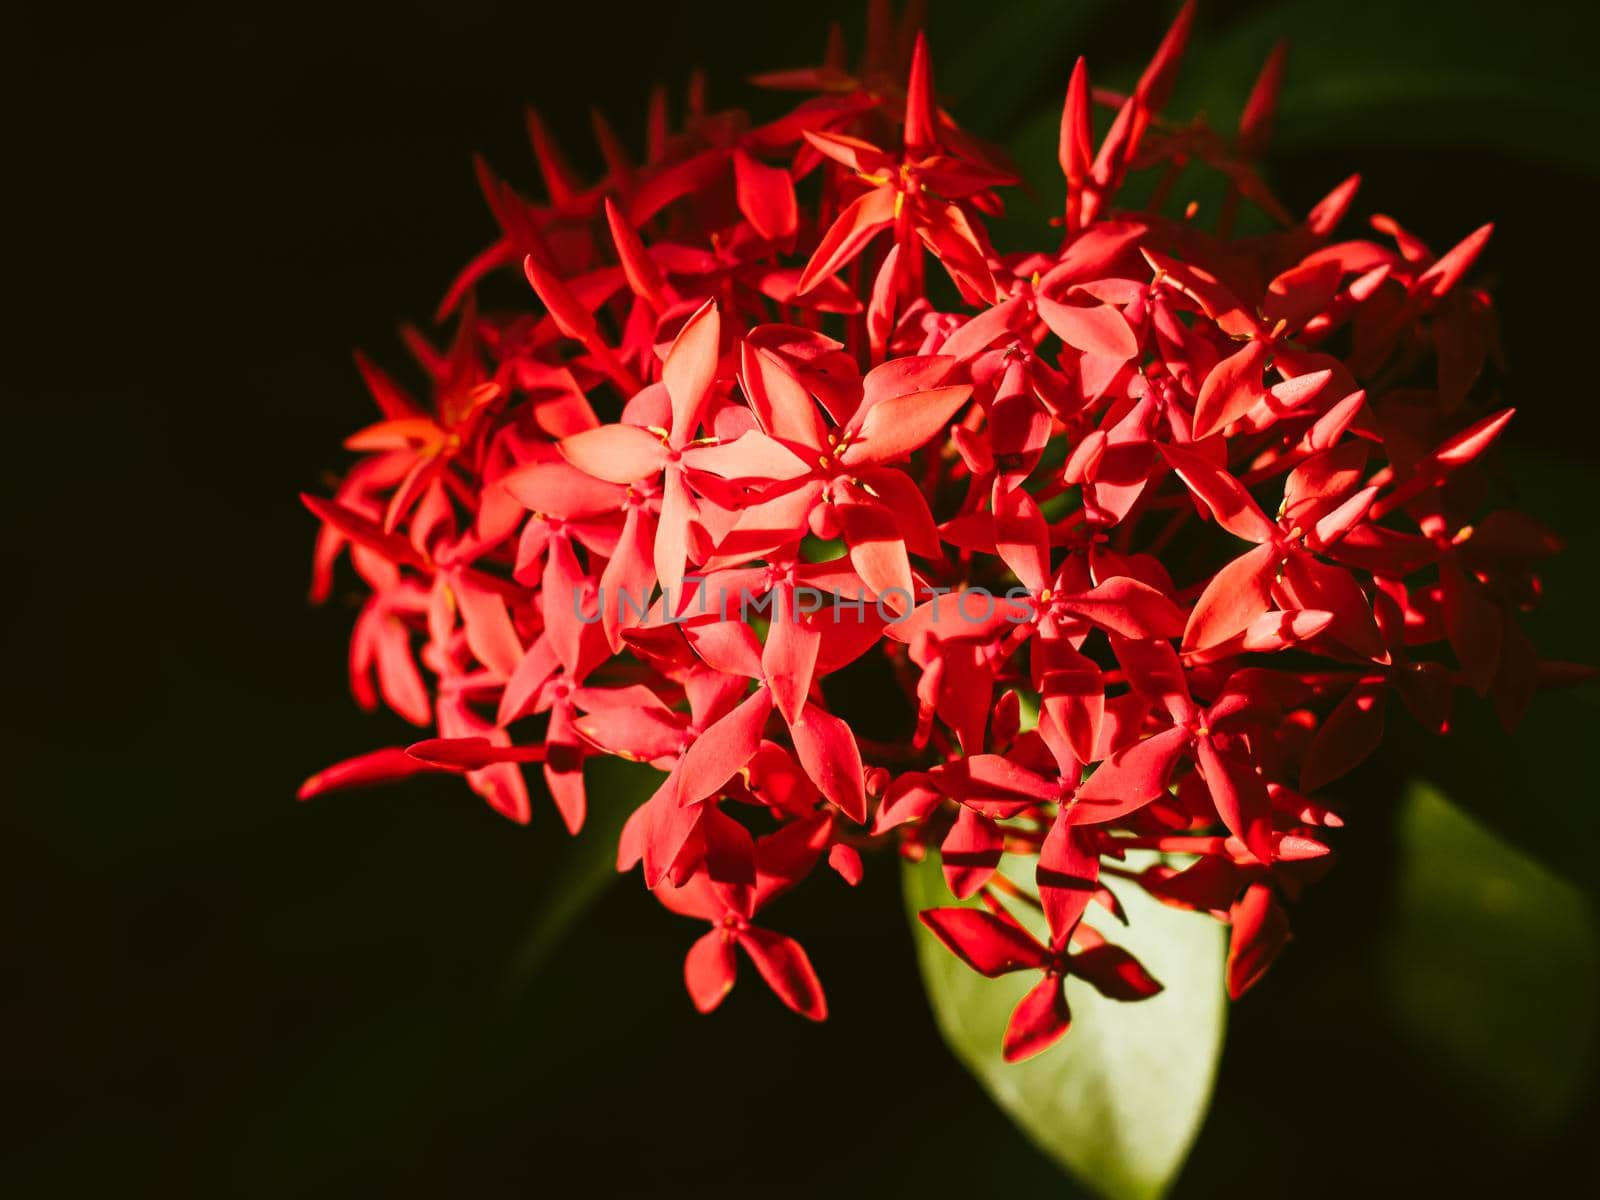 Ixora red beautiful flower. abstract love or valentine holiday event background by Petrichor